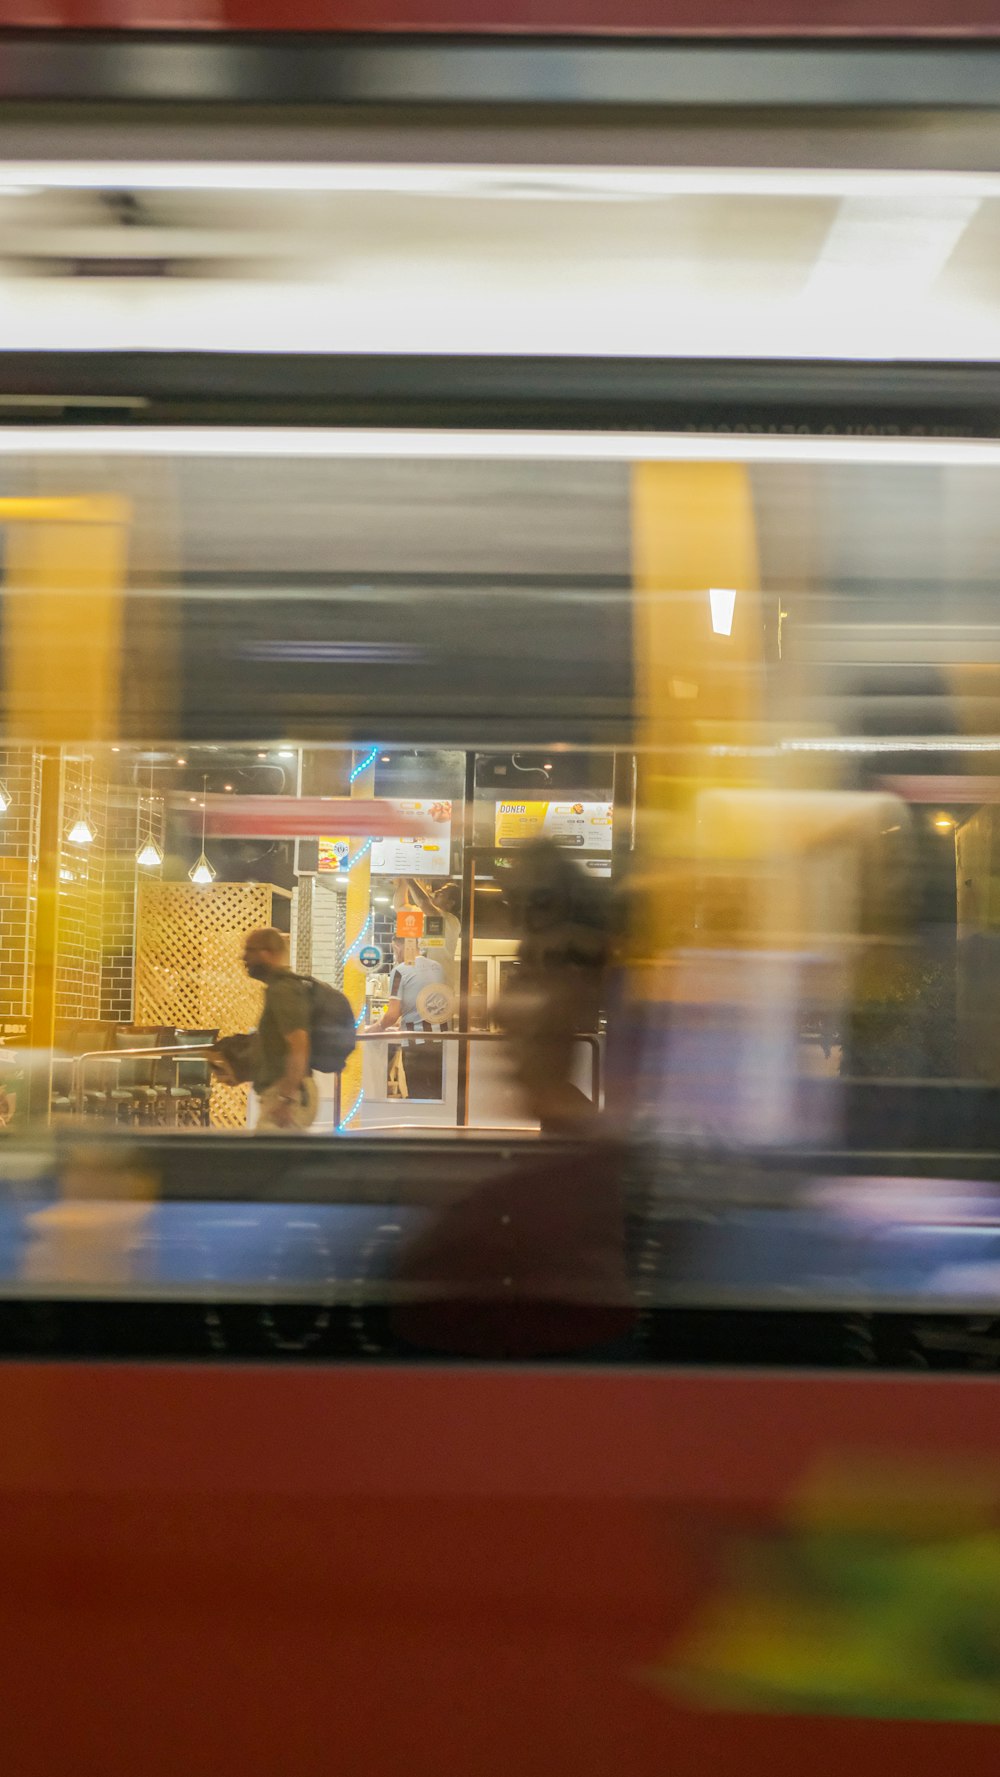 blurry image of people walking in a subway